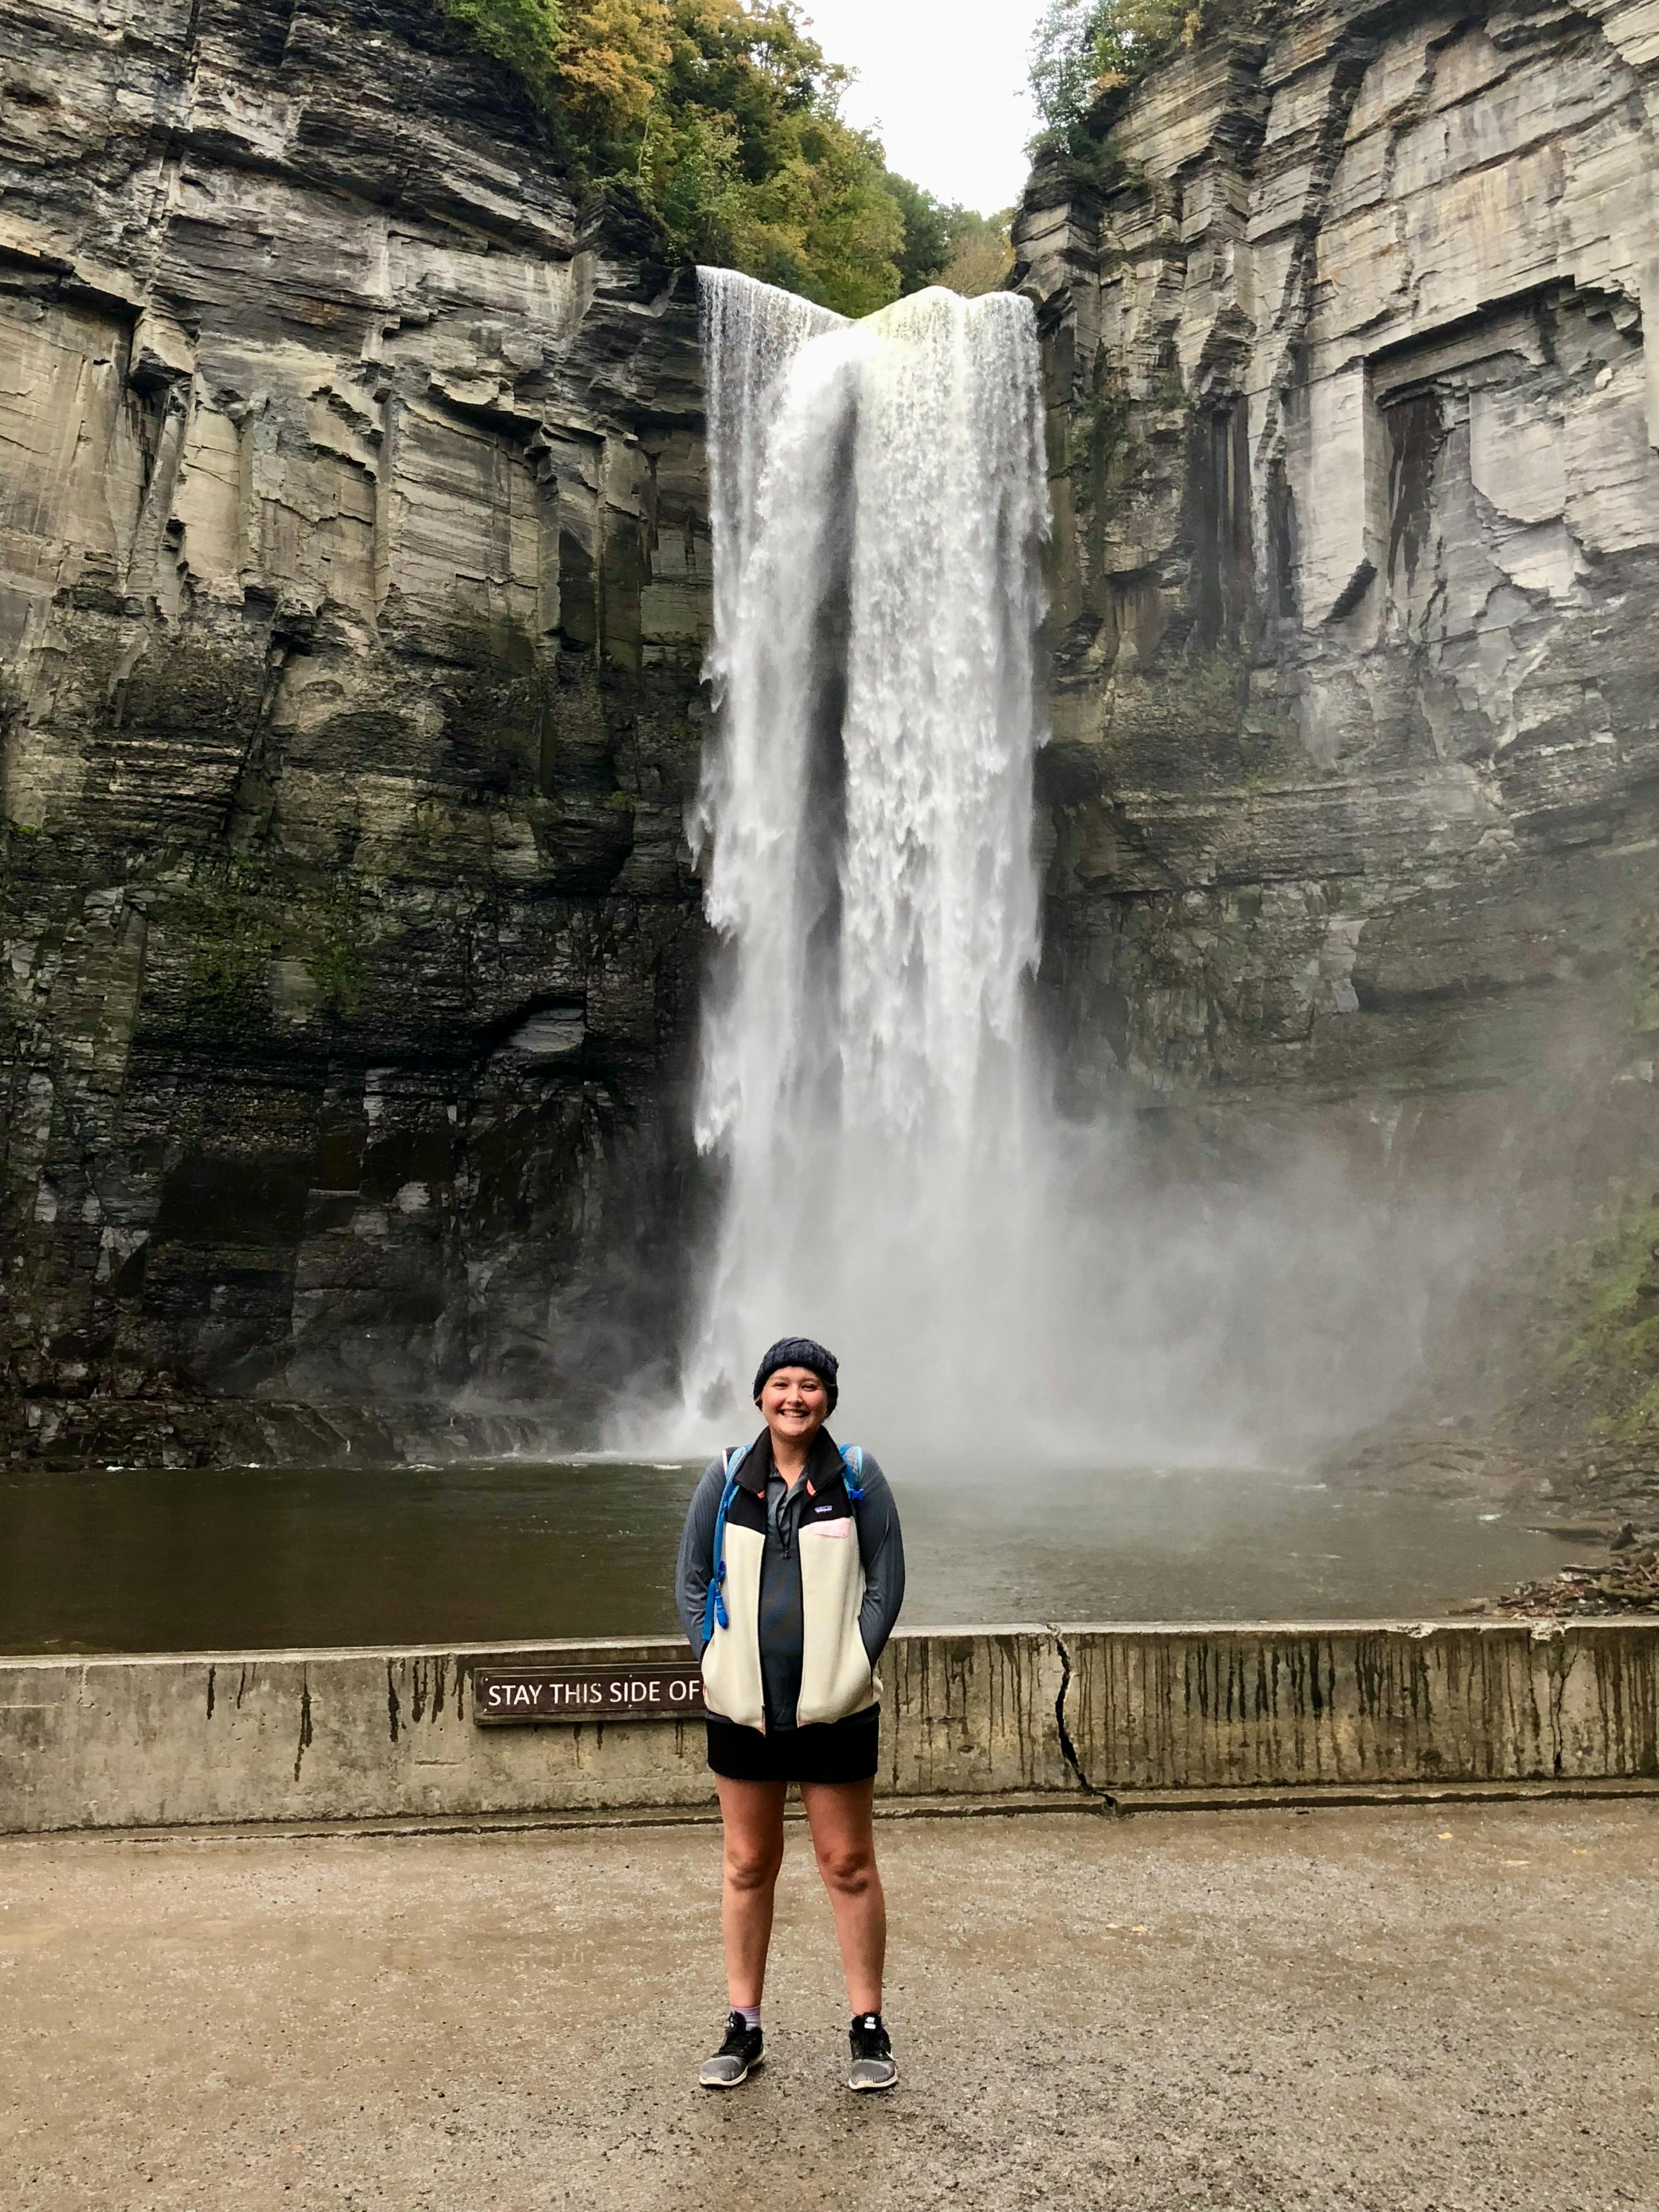 The author wears a hiking skirt, a fleece, and a beanie while standing on a platform in front of a waterfall.